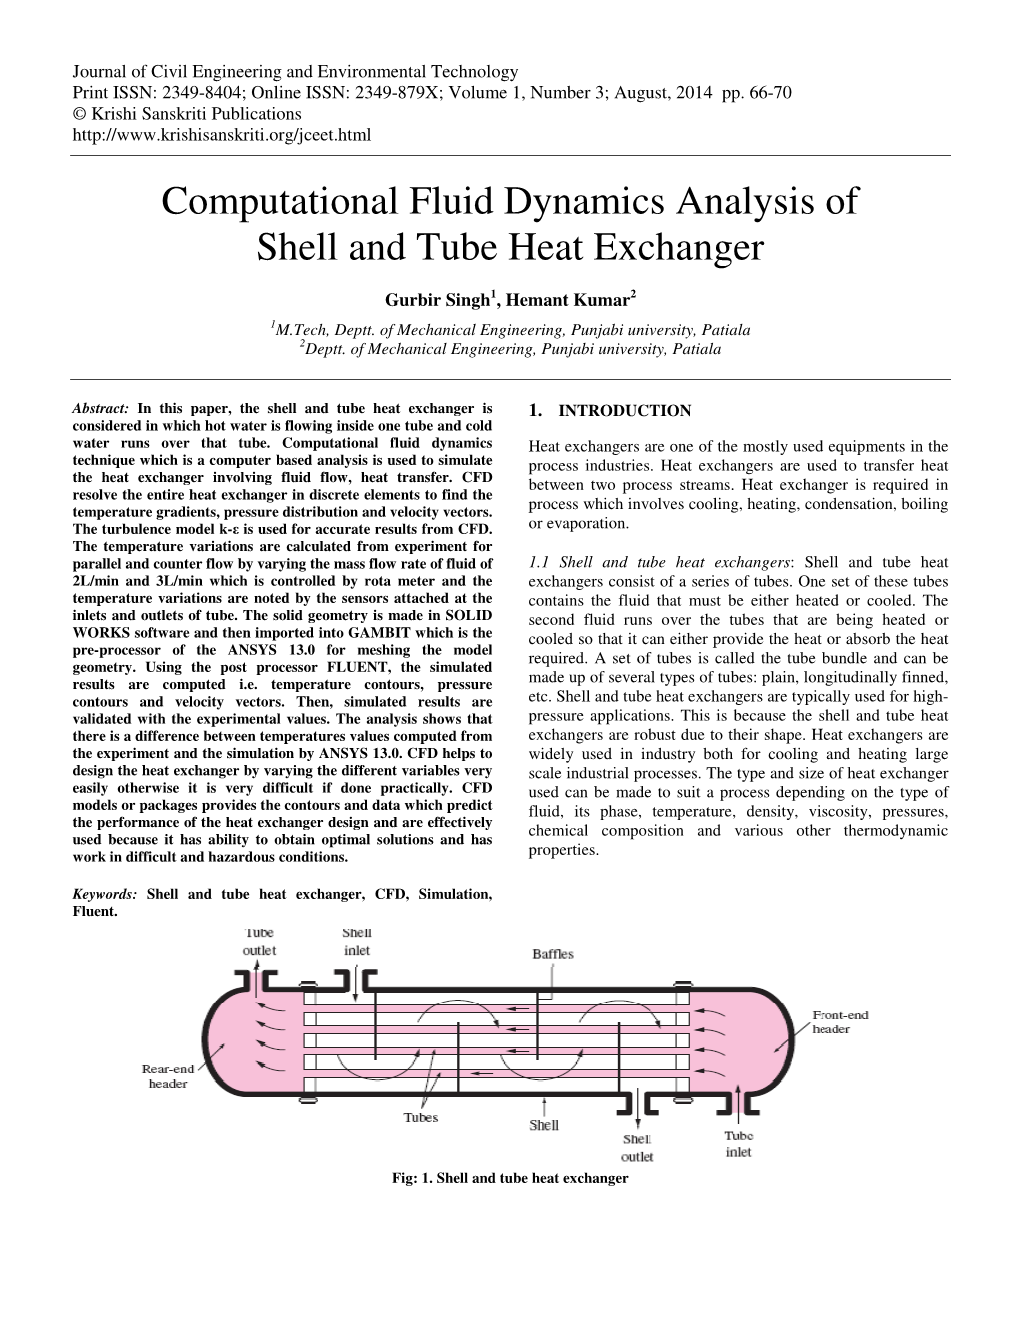 Computational Fluid Dynamics Analysis of Shell and Tube Heat Exchanger